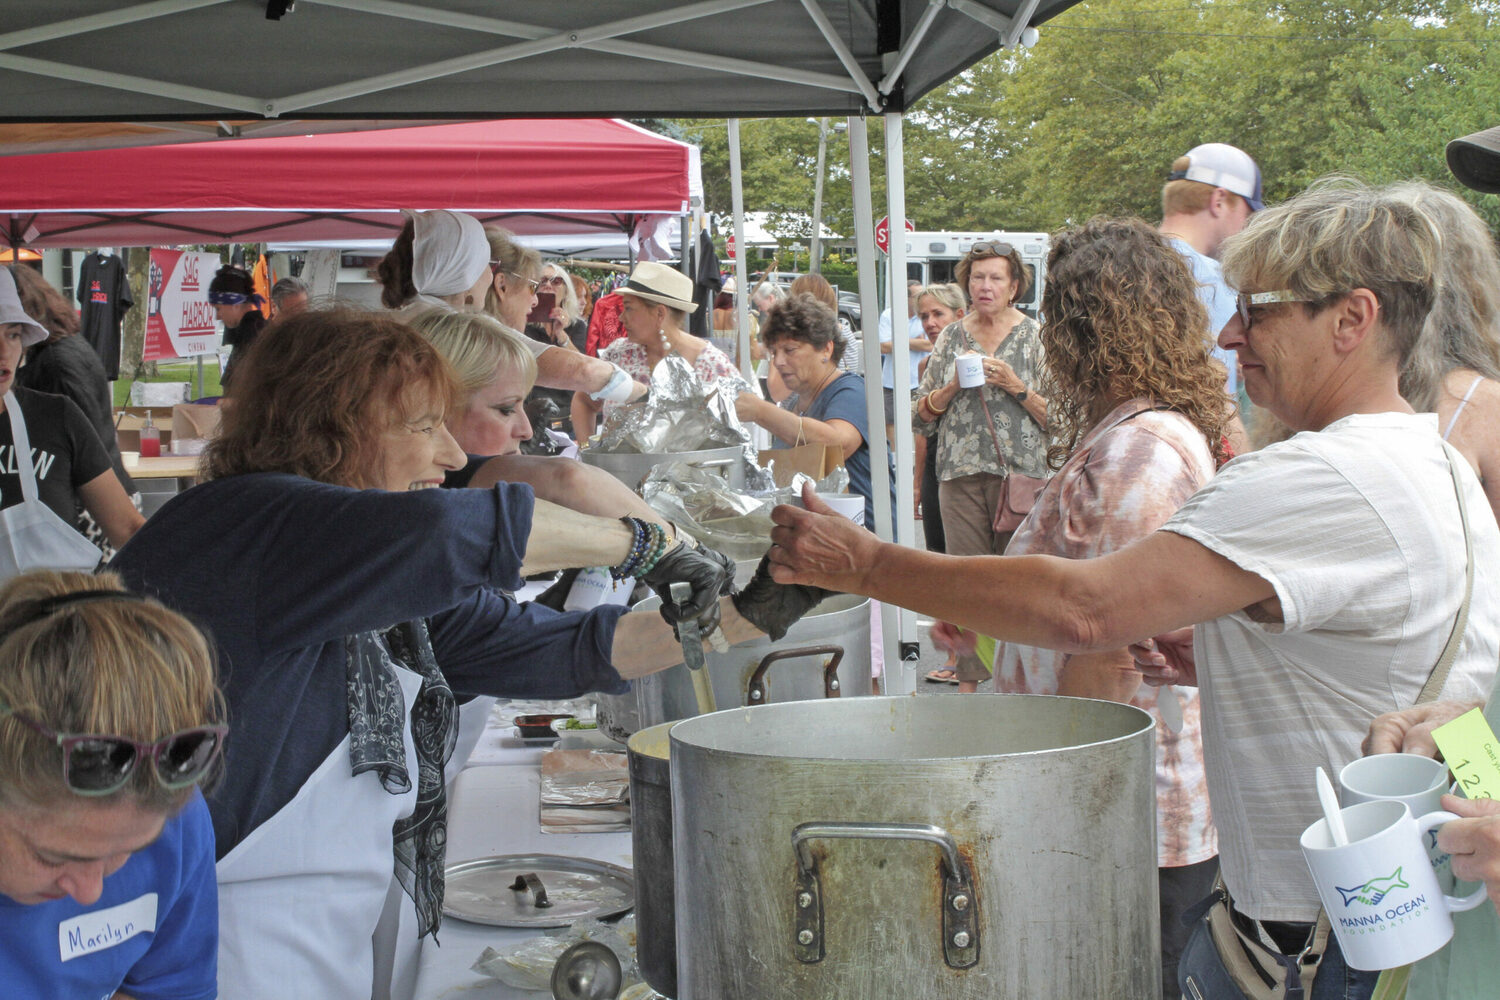 The clam chowder contest at HarborFest 2022.